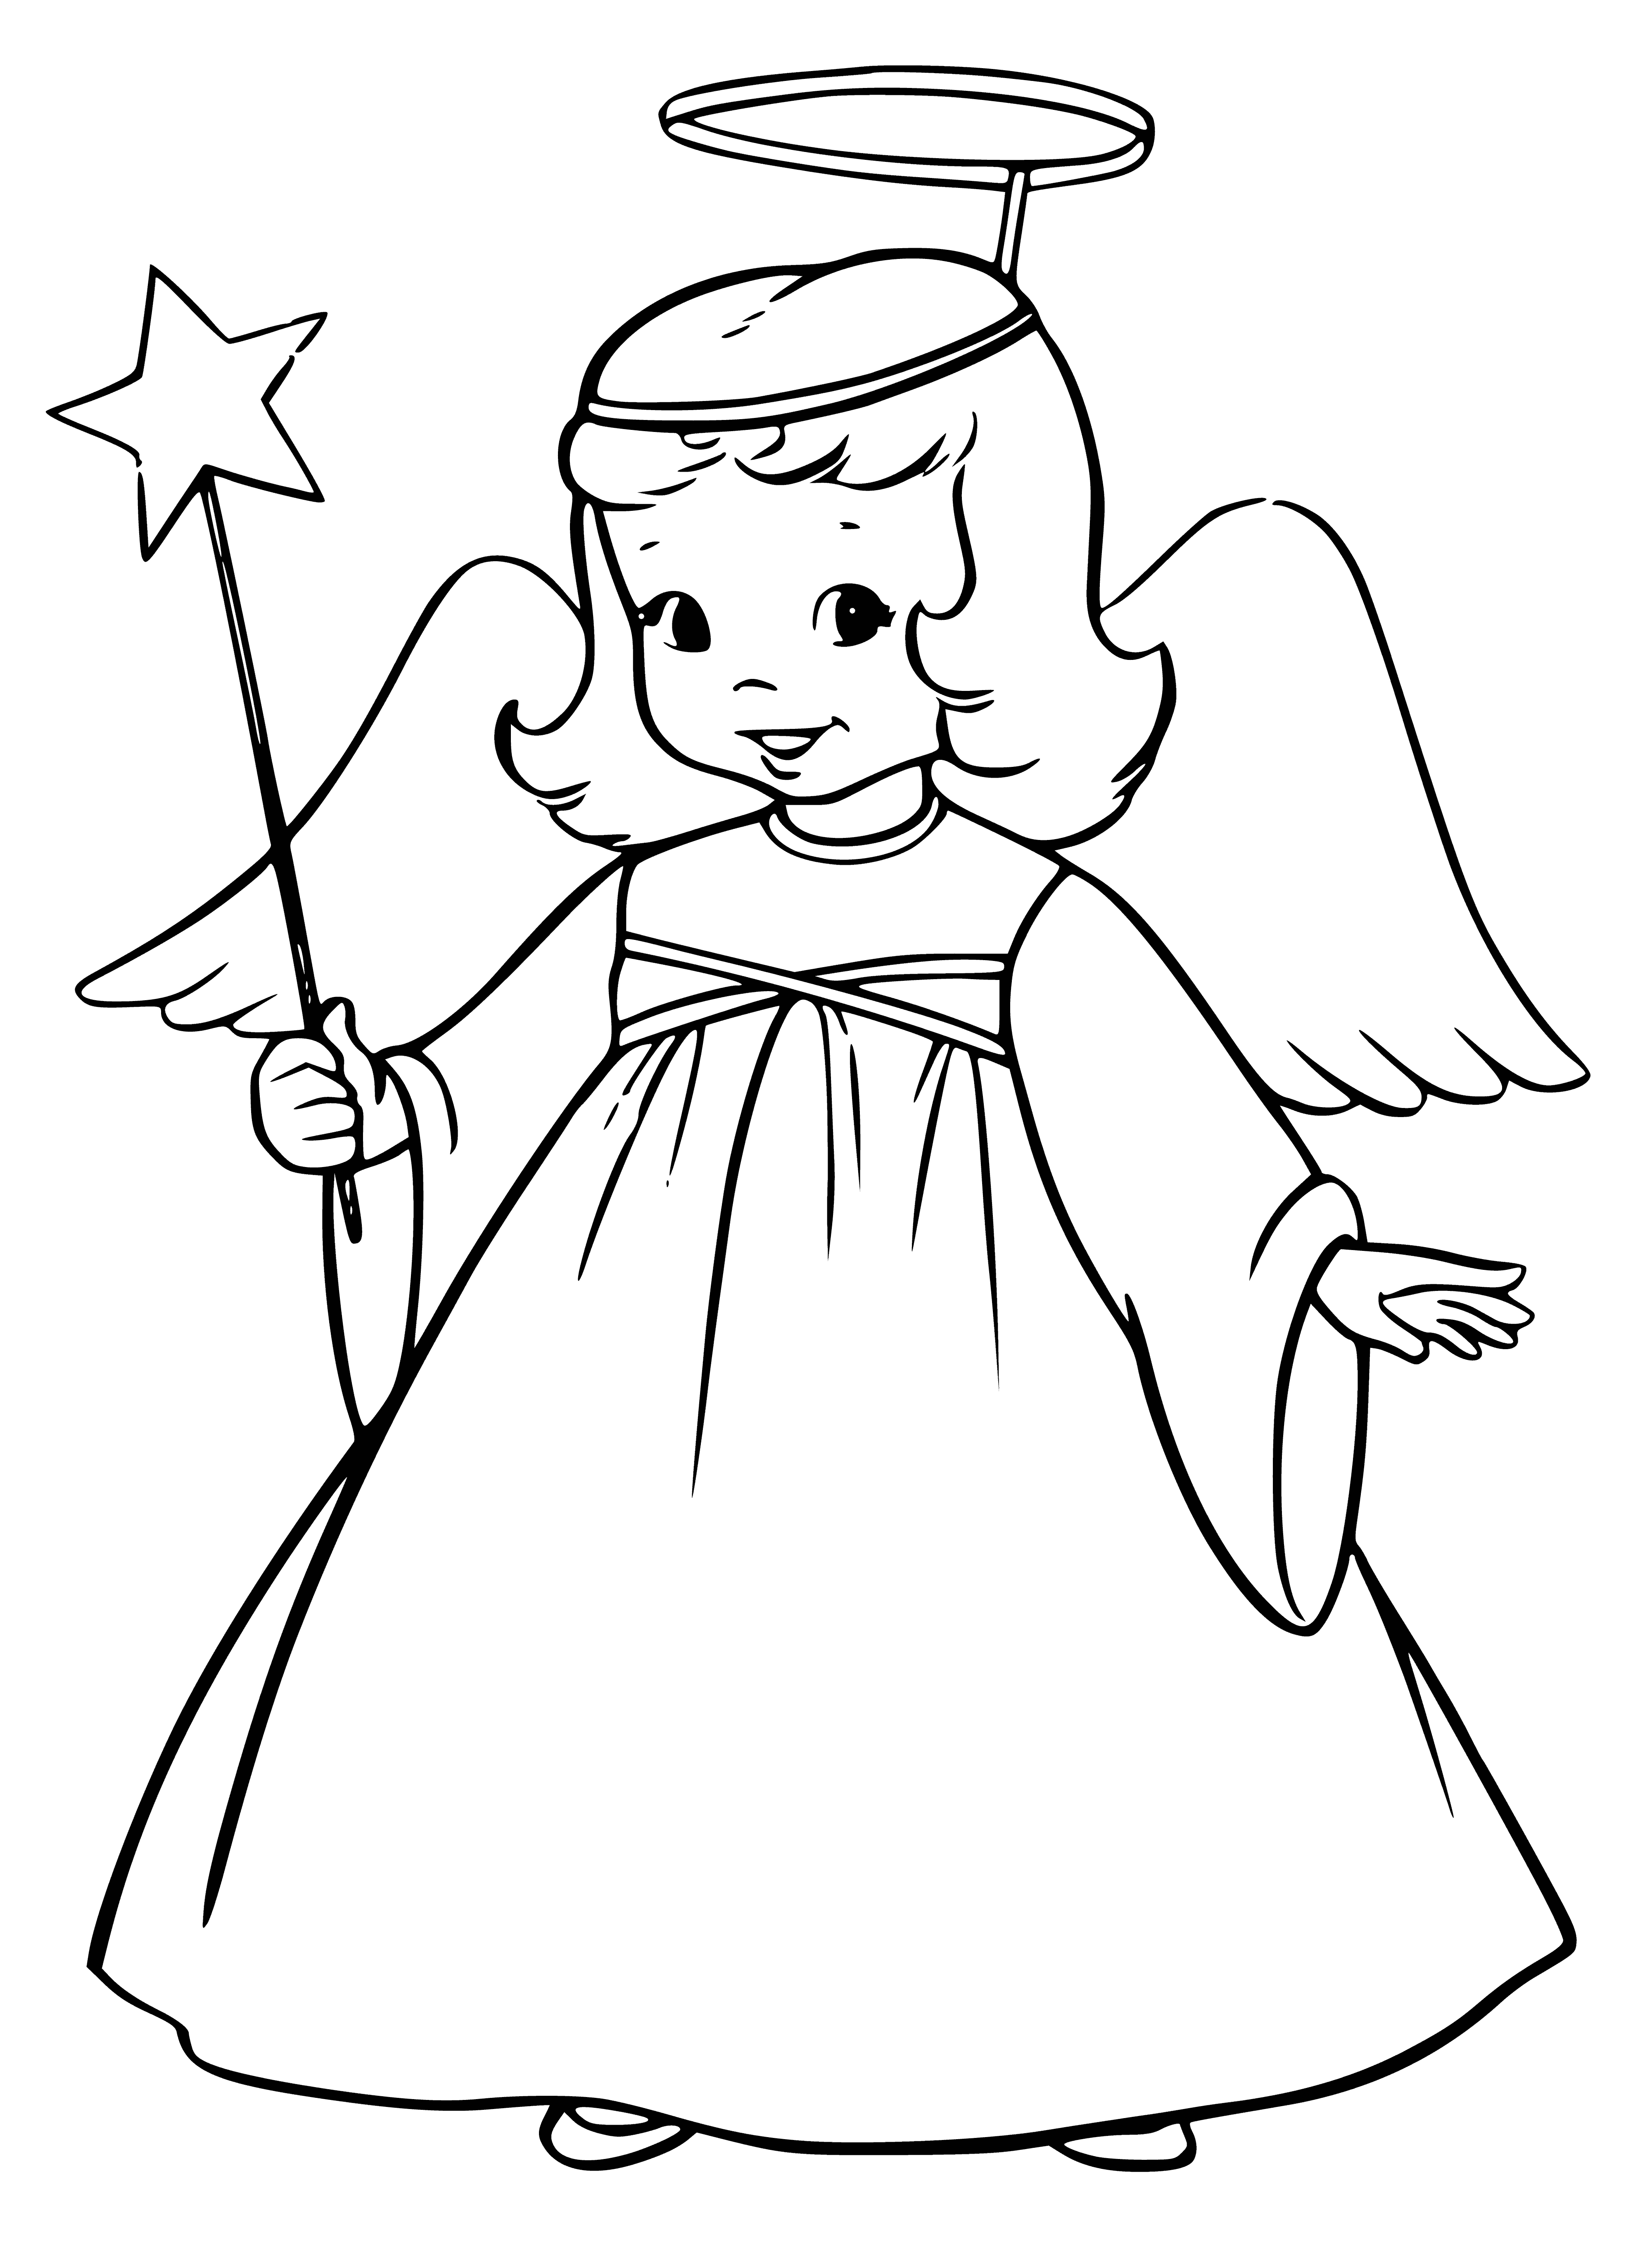 coloring page: Angel costume: white w/ Halo headpiece, delicate wings, fluffy skirt & gold belt.